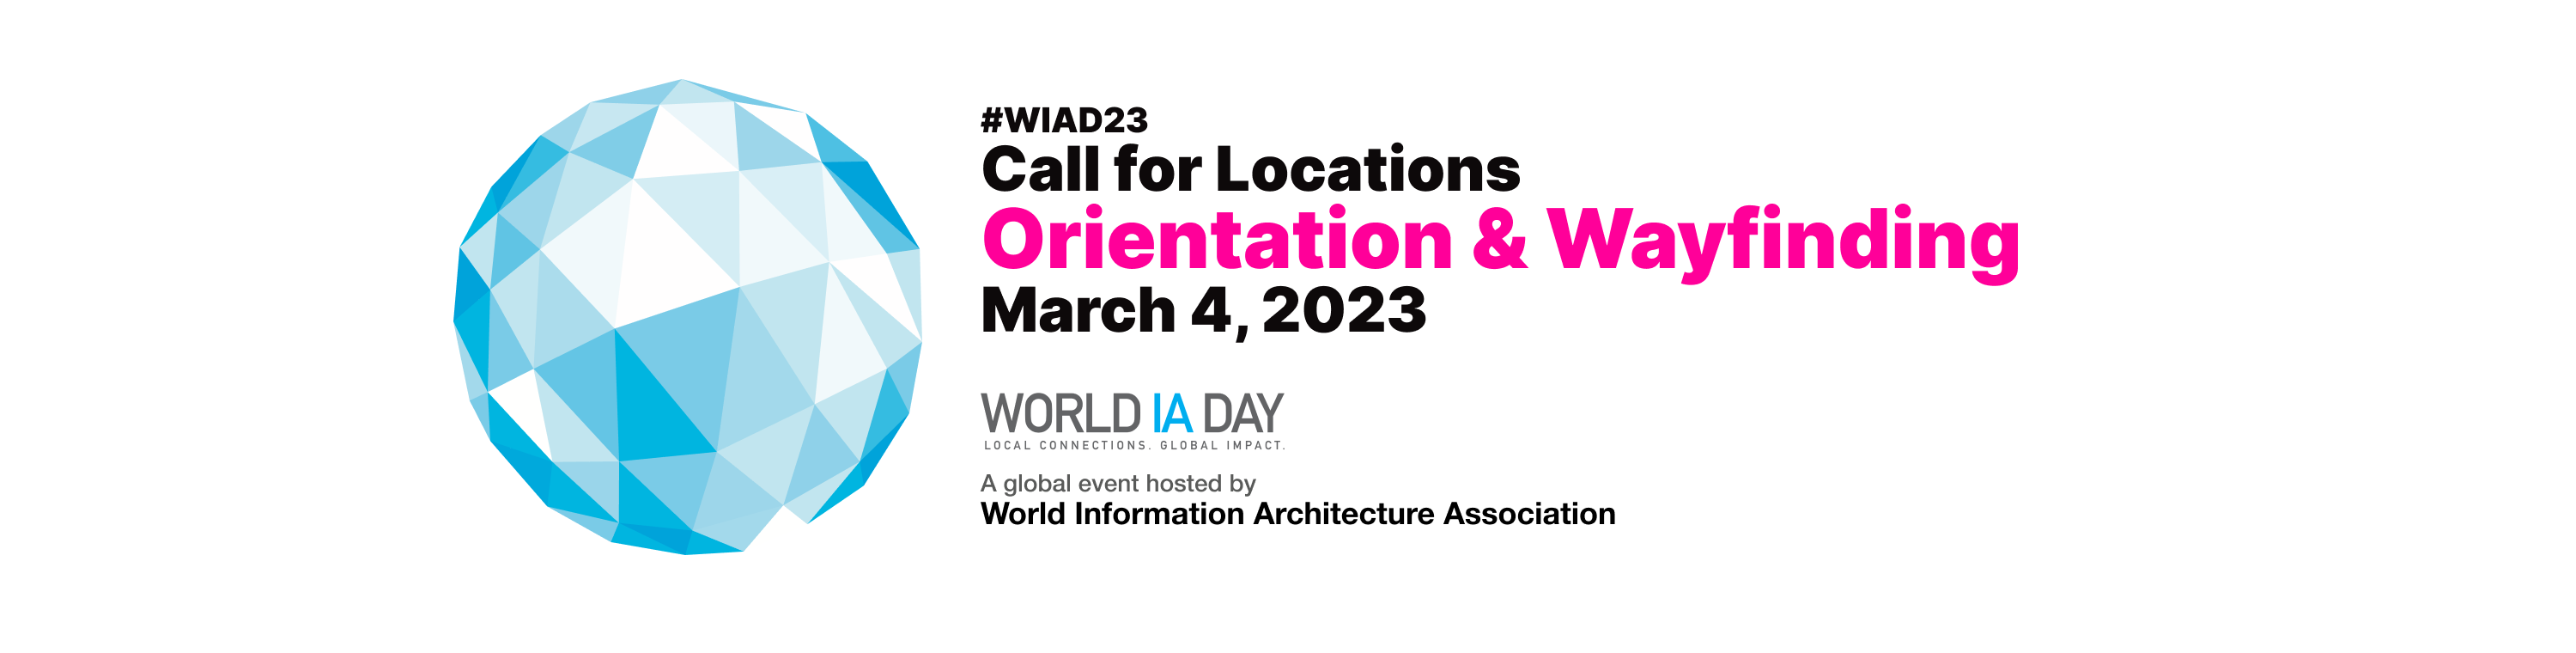 World IA Day is back on March 4, 2023 with a Call for Location